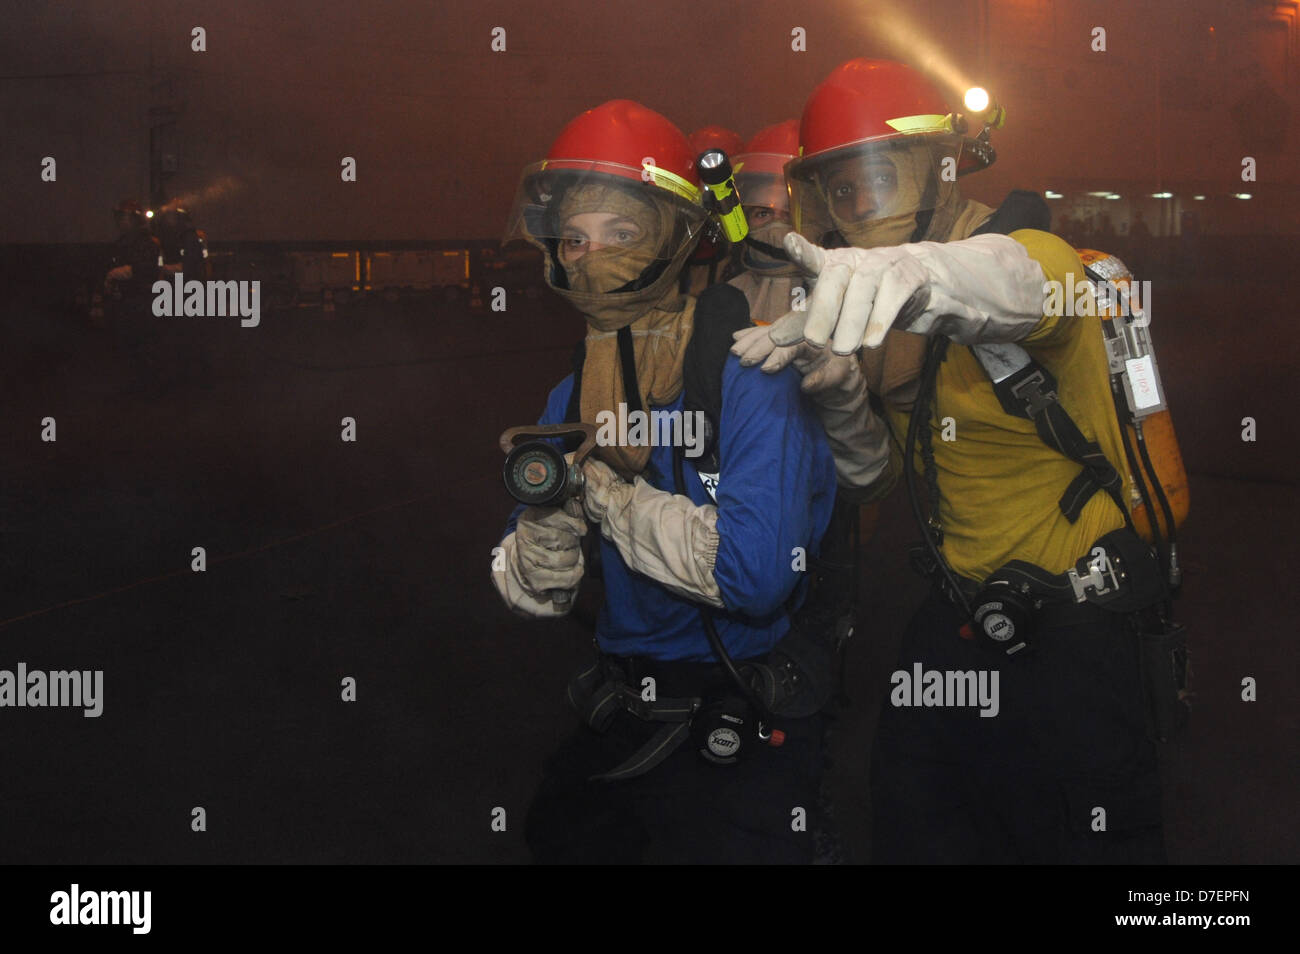 Sailors conduct a firefighter drill. Stock Photo